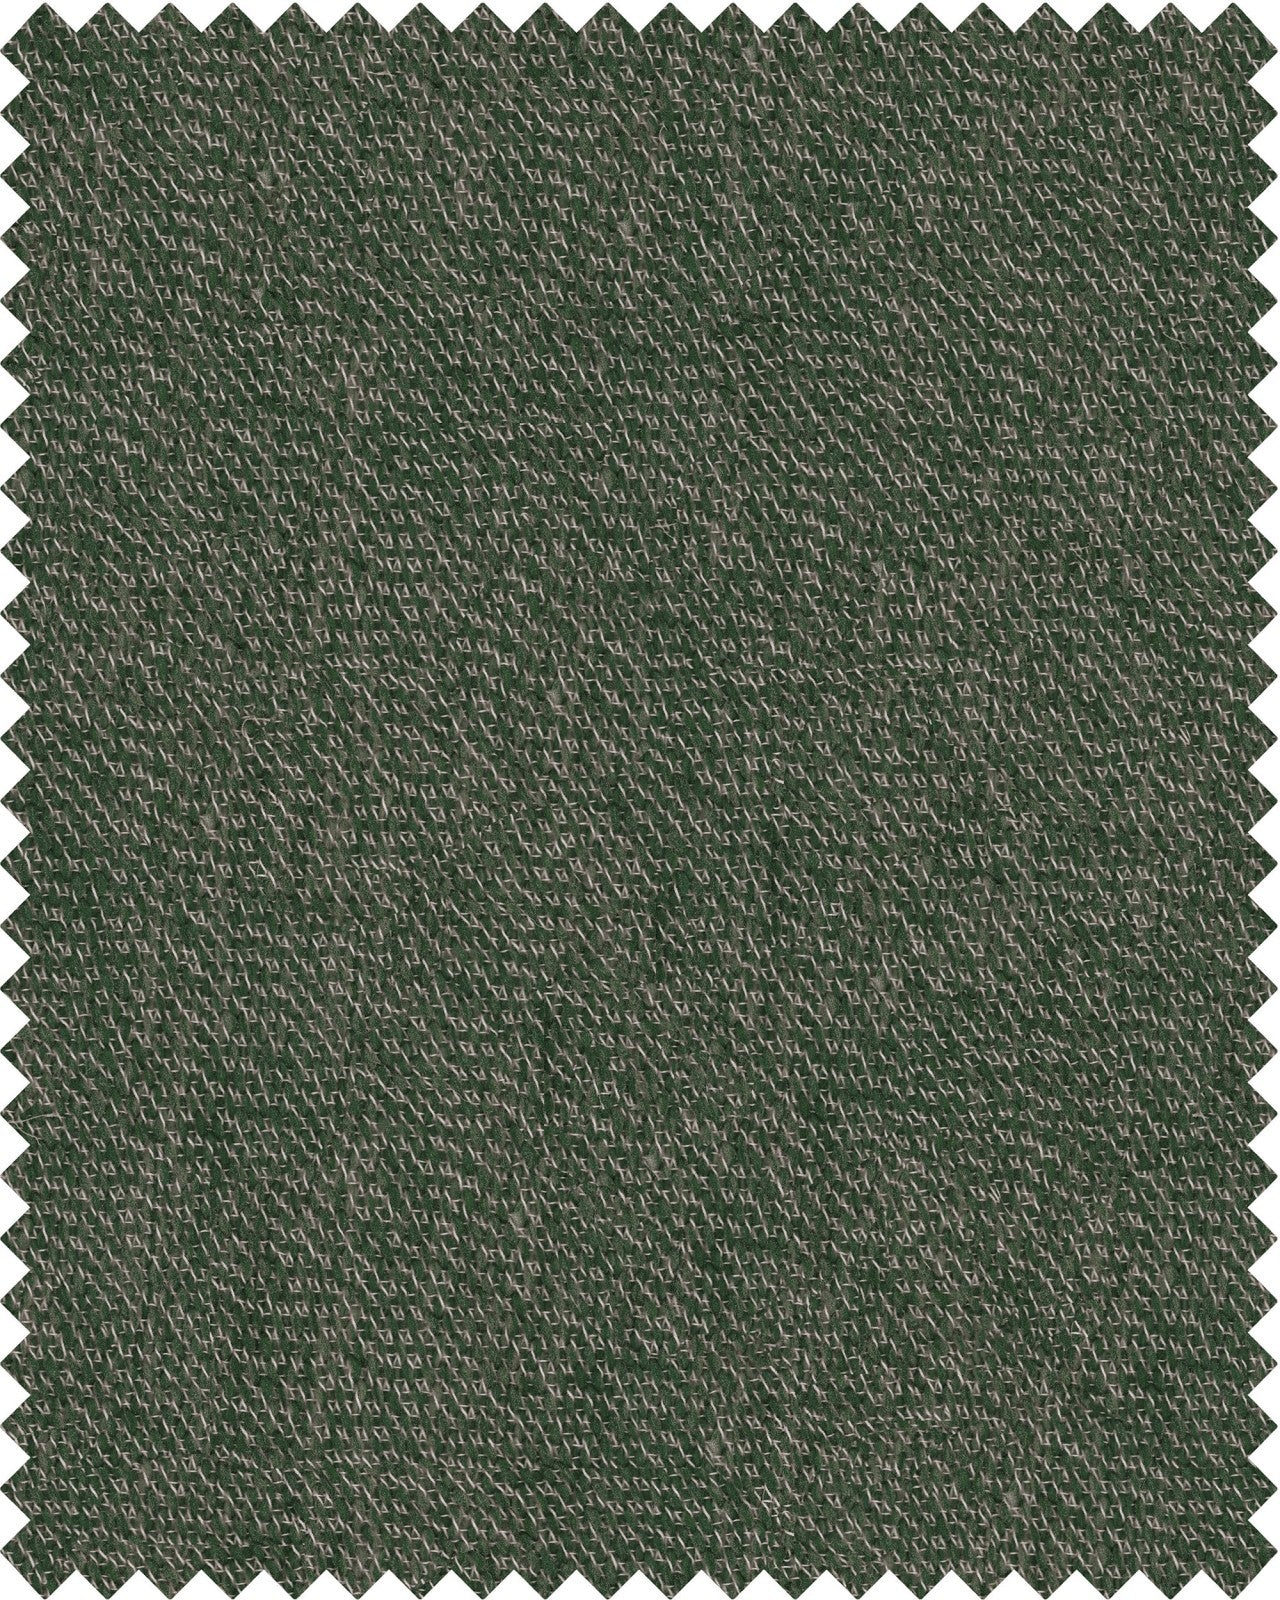 Grüner Baum fabric in forest green color - pattern number FB00103 - by Mind The Gap in the Tyrol Apres-ski Home Collection collection